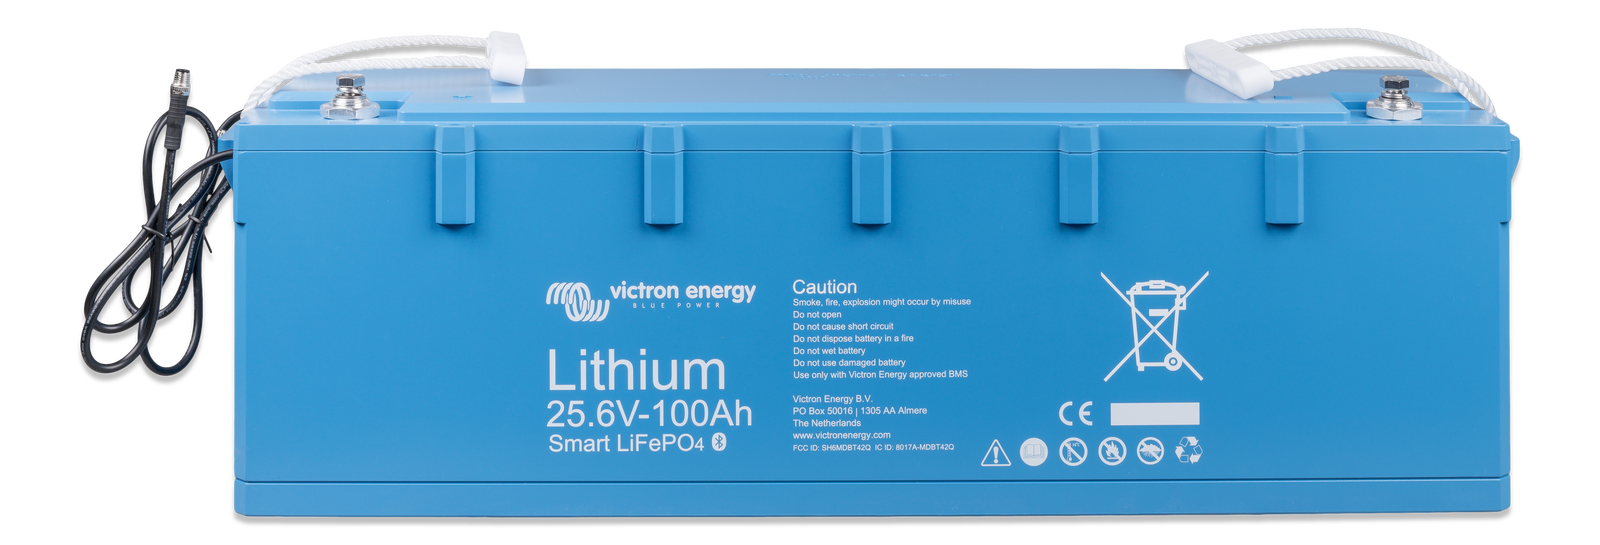 Victron Solar Battery Charger Eco Worthy Lithium Battery SCC075015060R